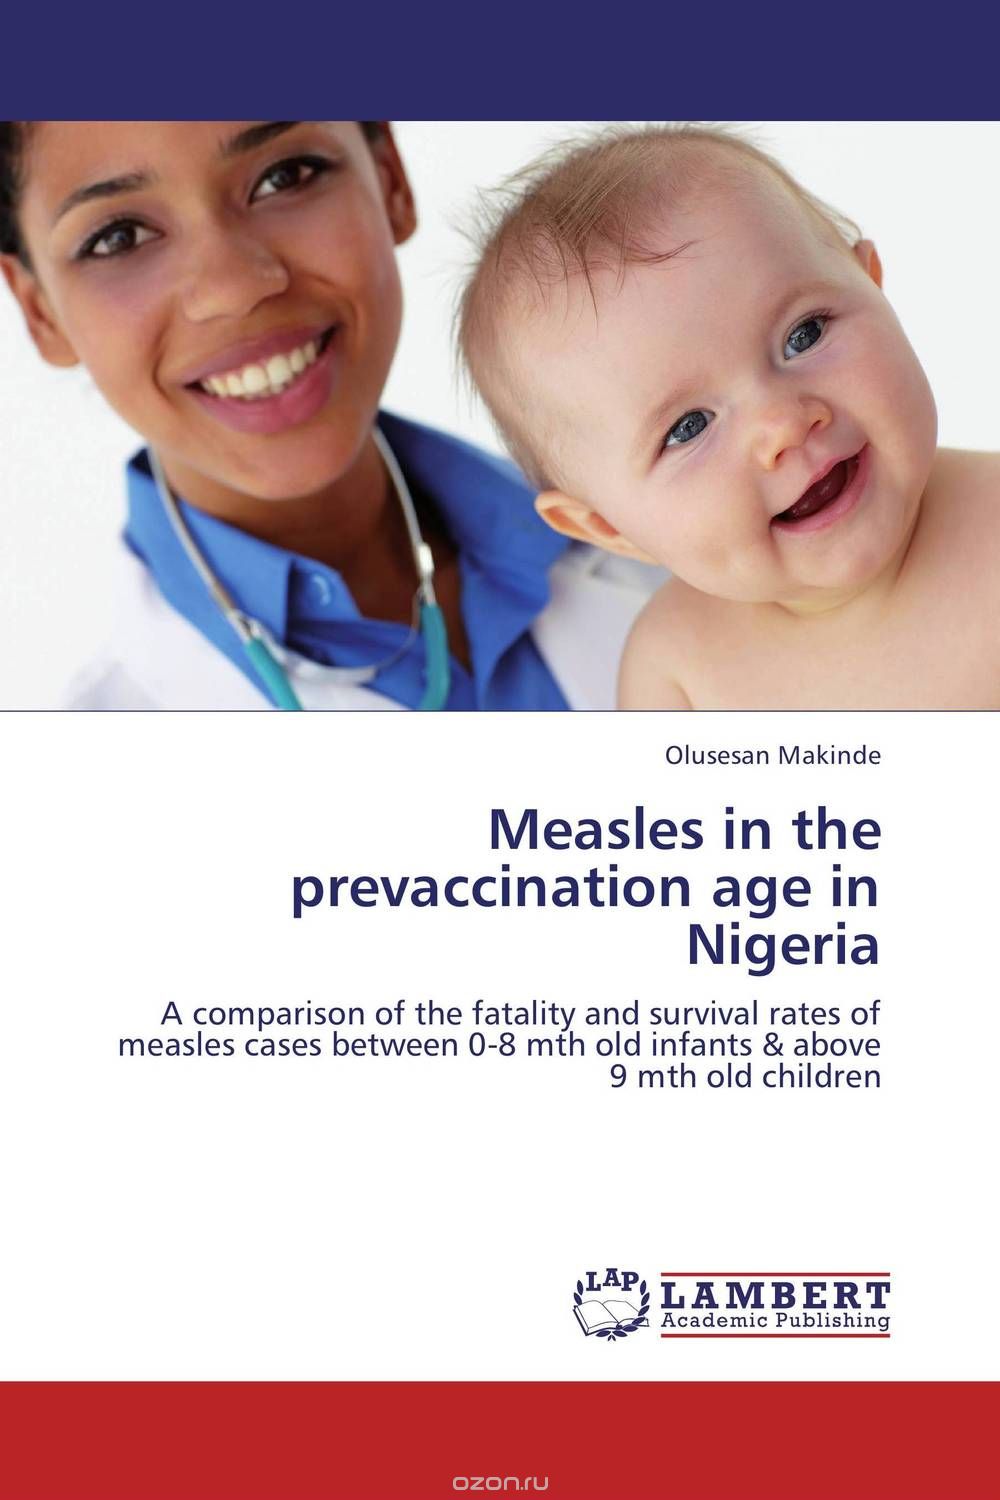 Measles in the prevaccination age in Nigeria